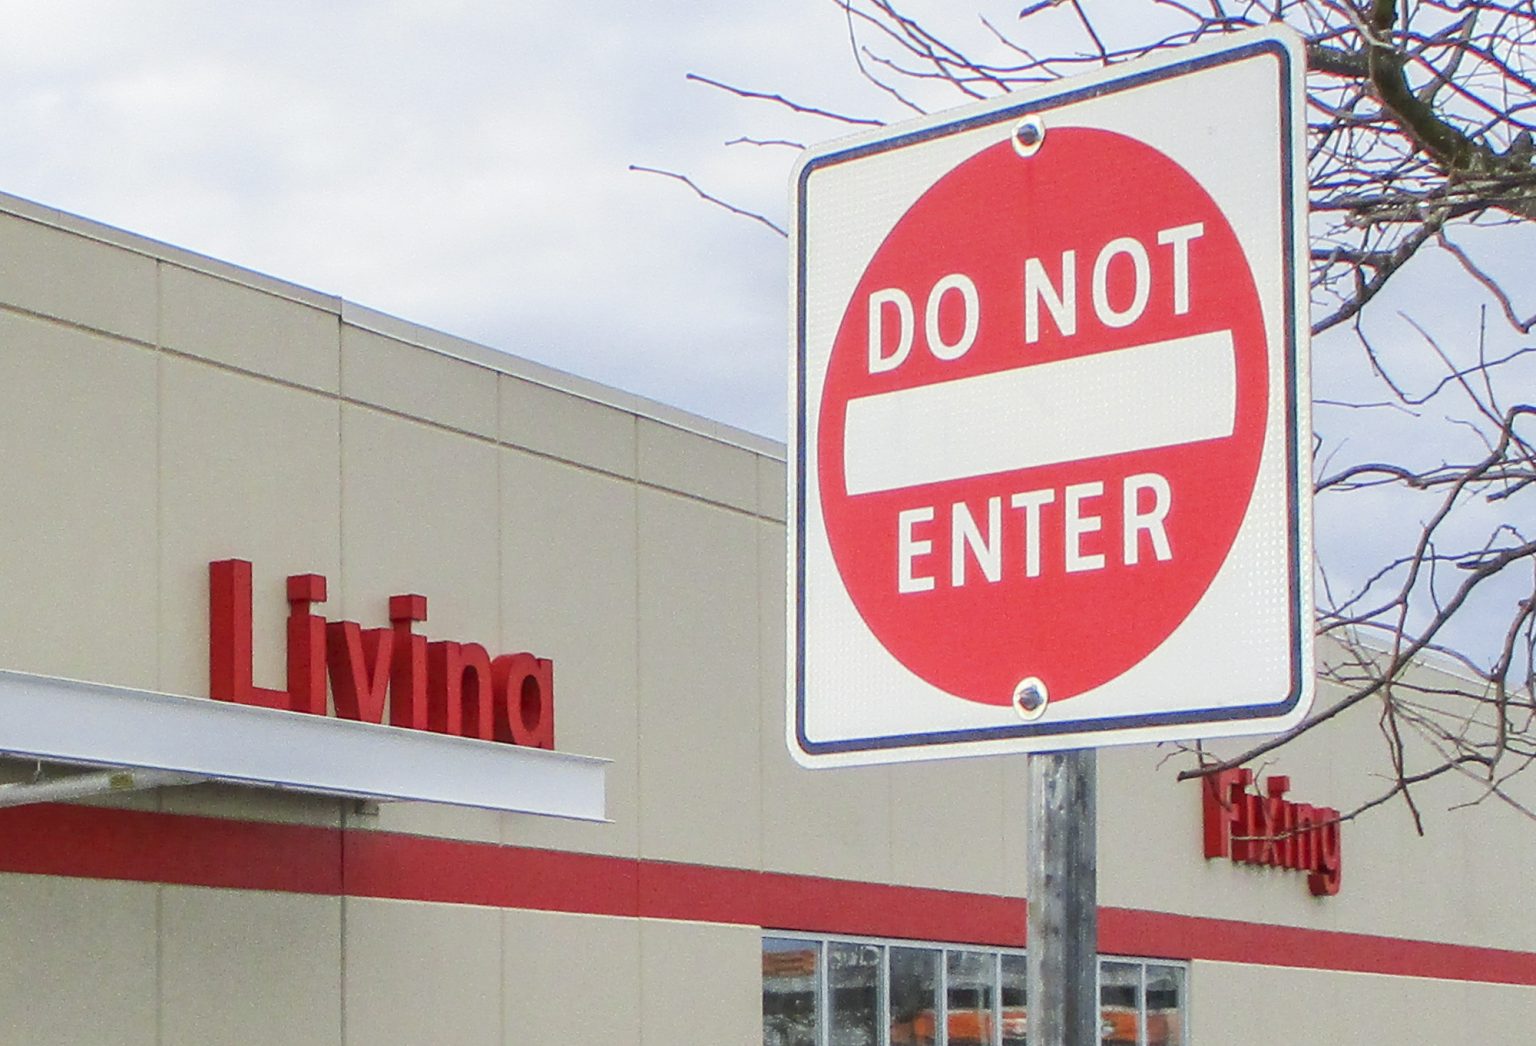 Image shows "Do Not Enter" sign in front of a Canadian Tire store. On the front of the story are two signs that say "Living" and "Fixing"